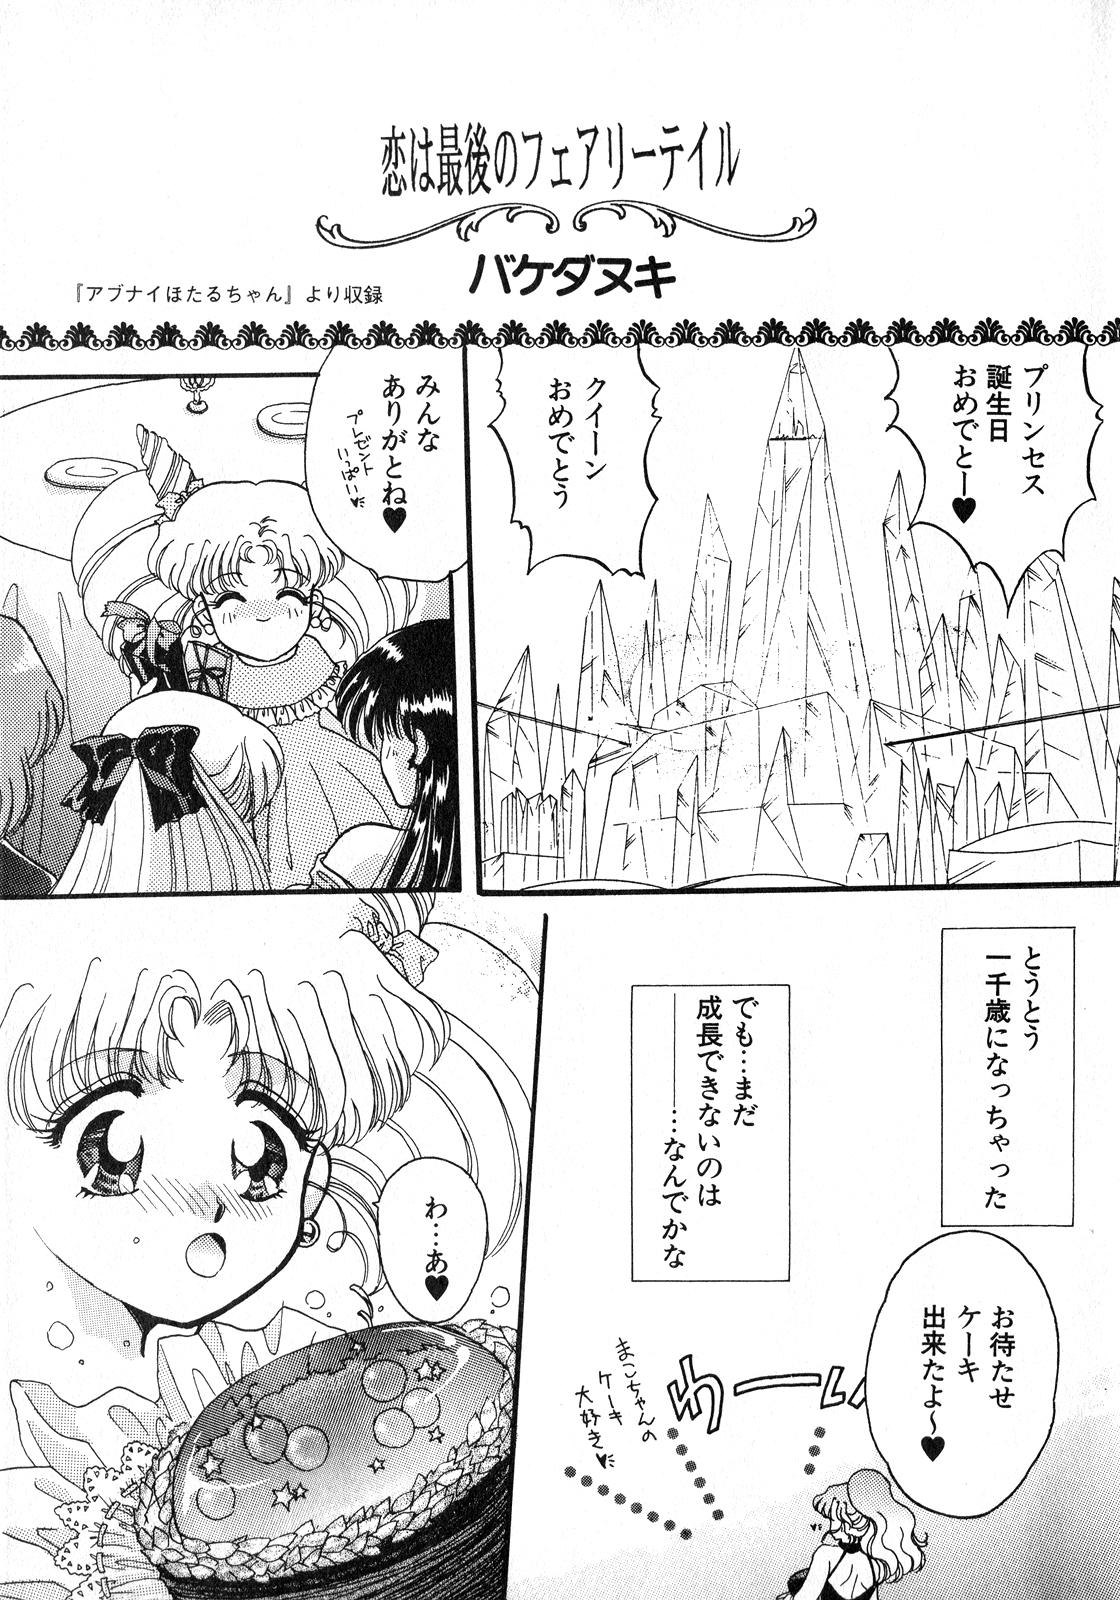 Teenager Lunatic Party 8 - Sailor moon Rola - Page 4